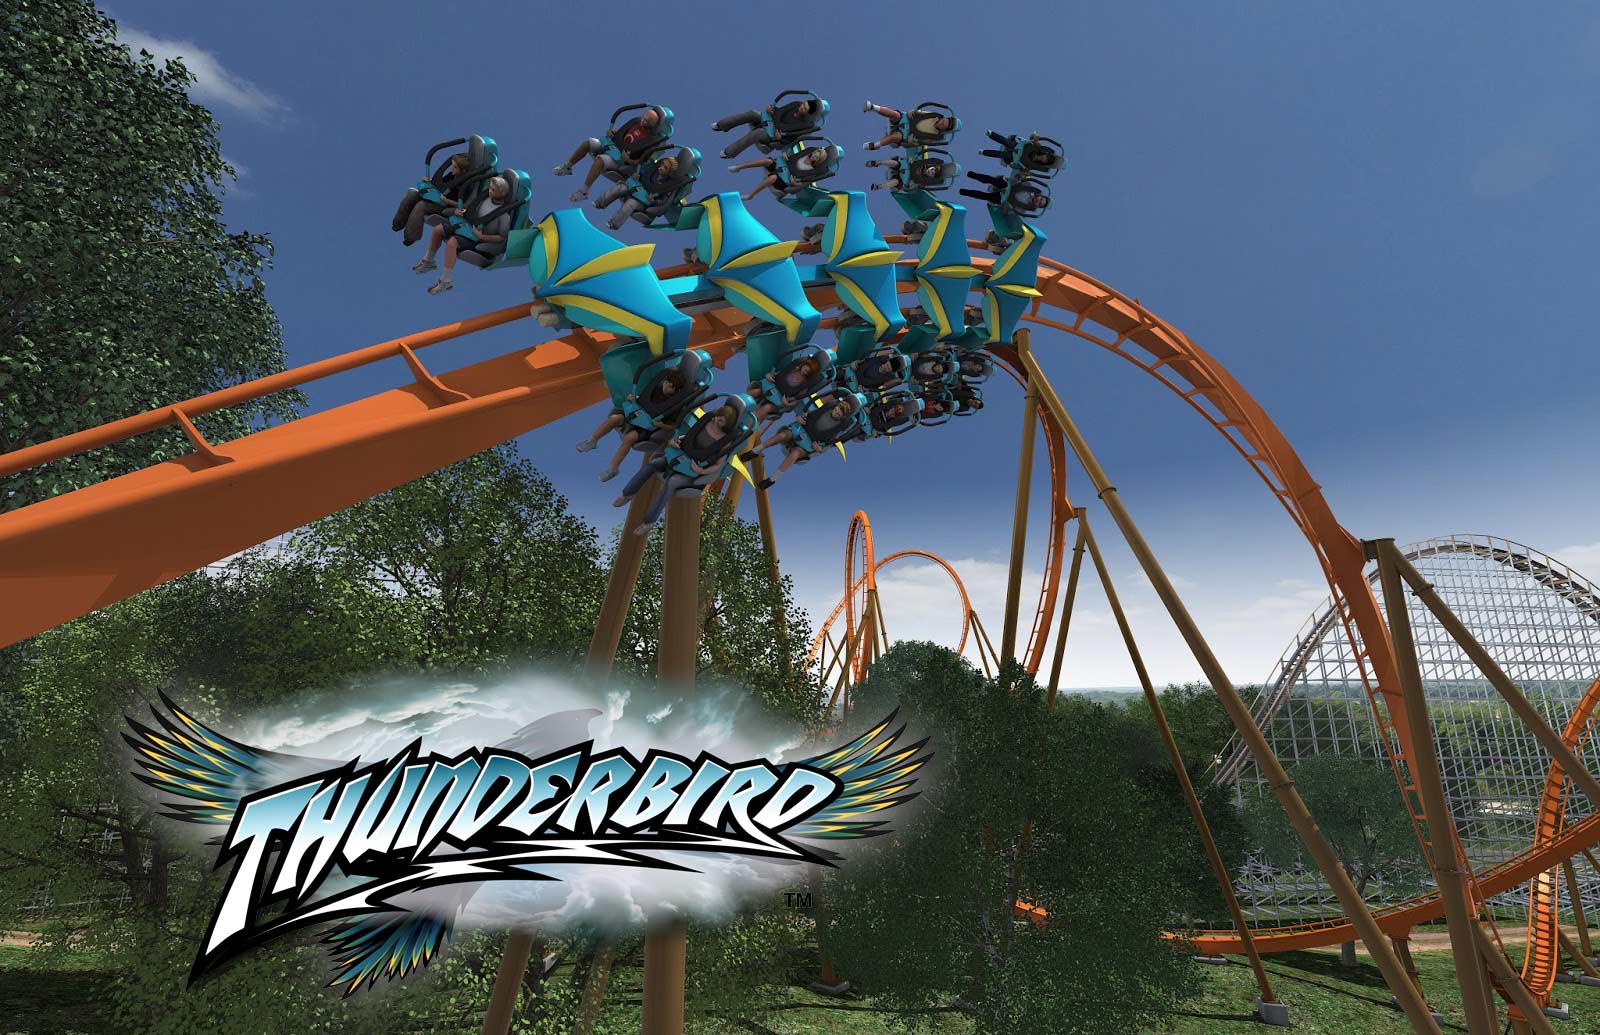 Holiday World Thunderbird Roller Coaster Wallpaper Click Picture For